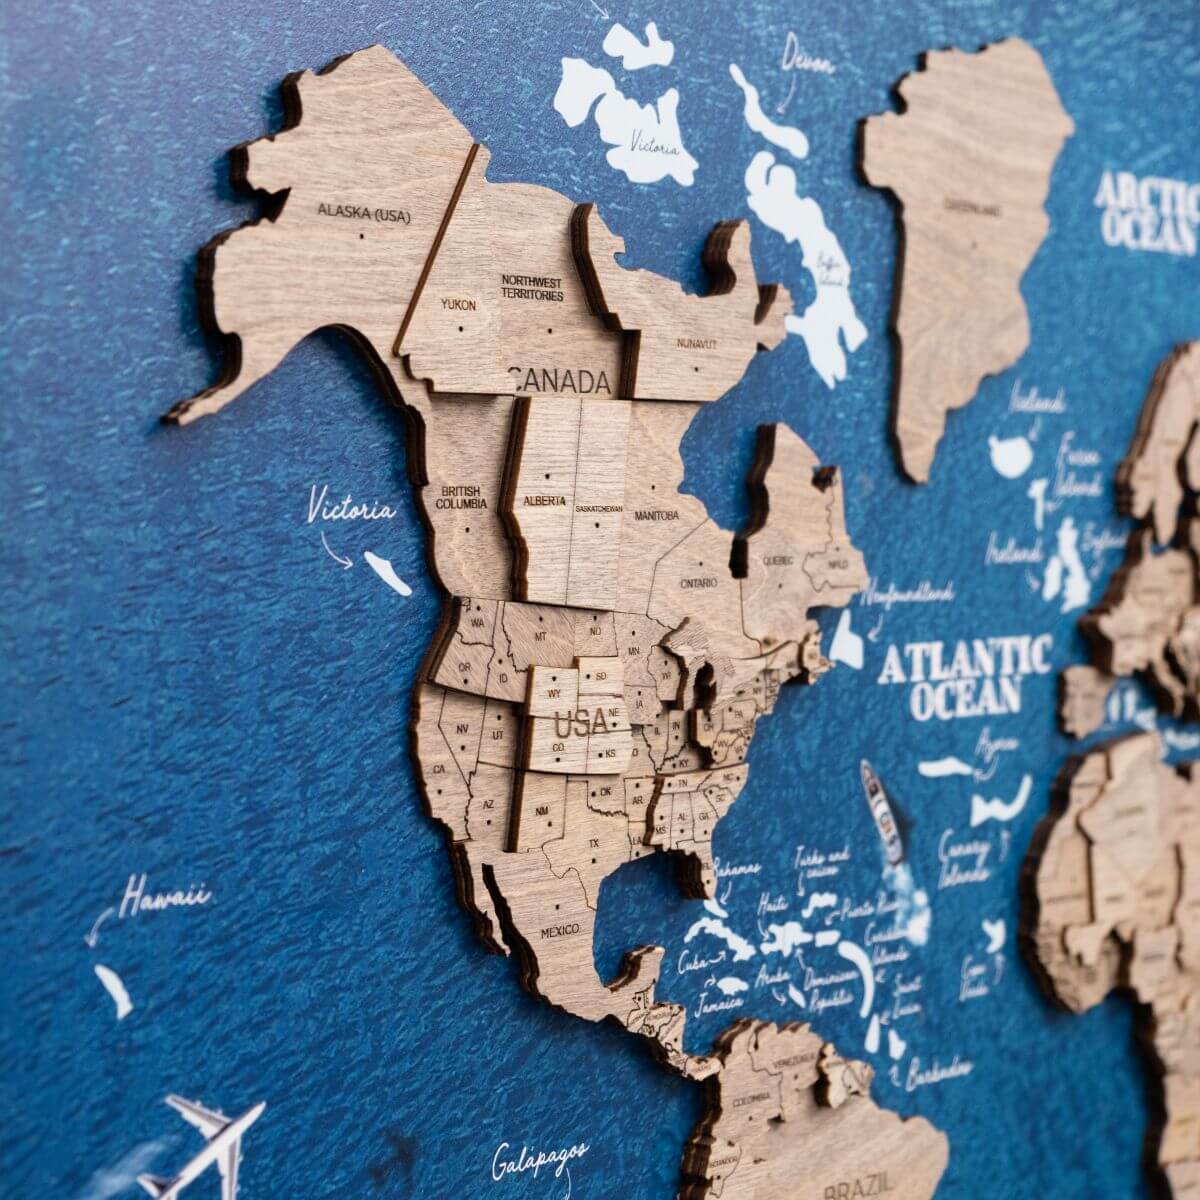 The first-ever 3D Wooden World Map to chart your travels - Yanko